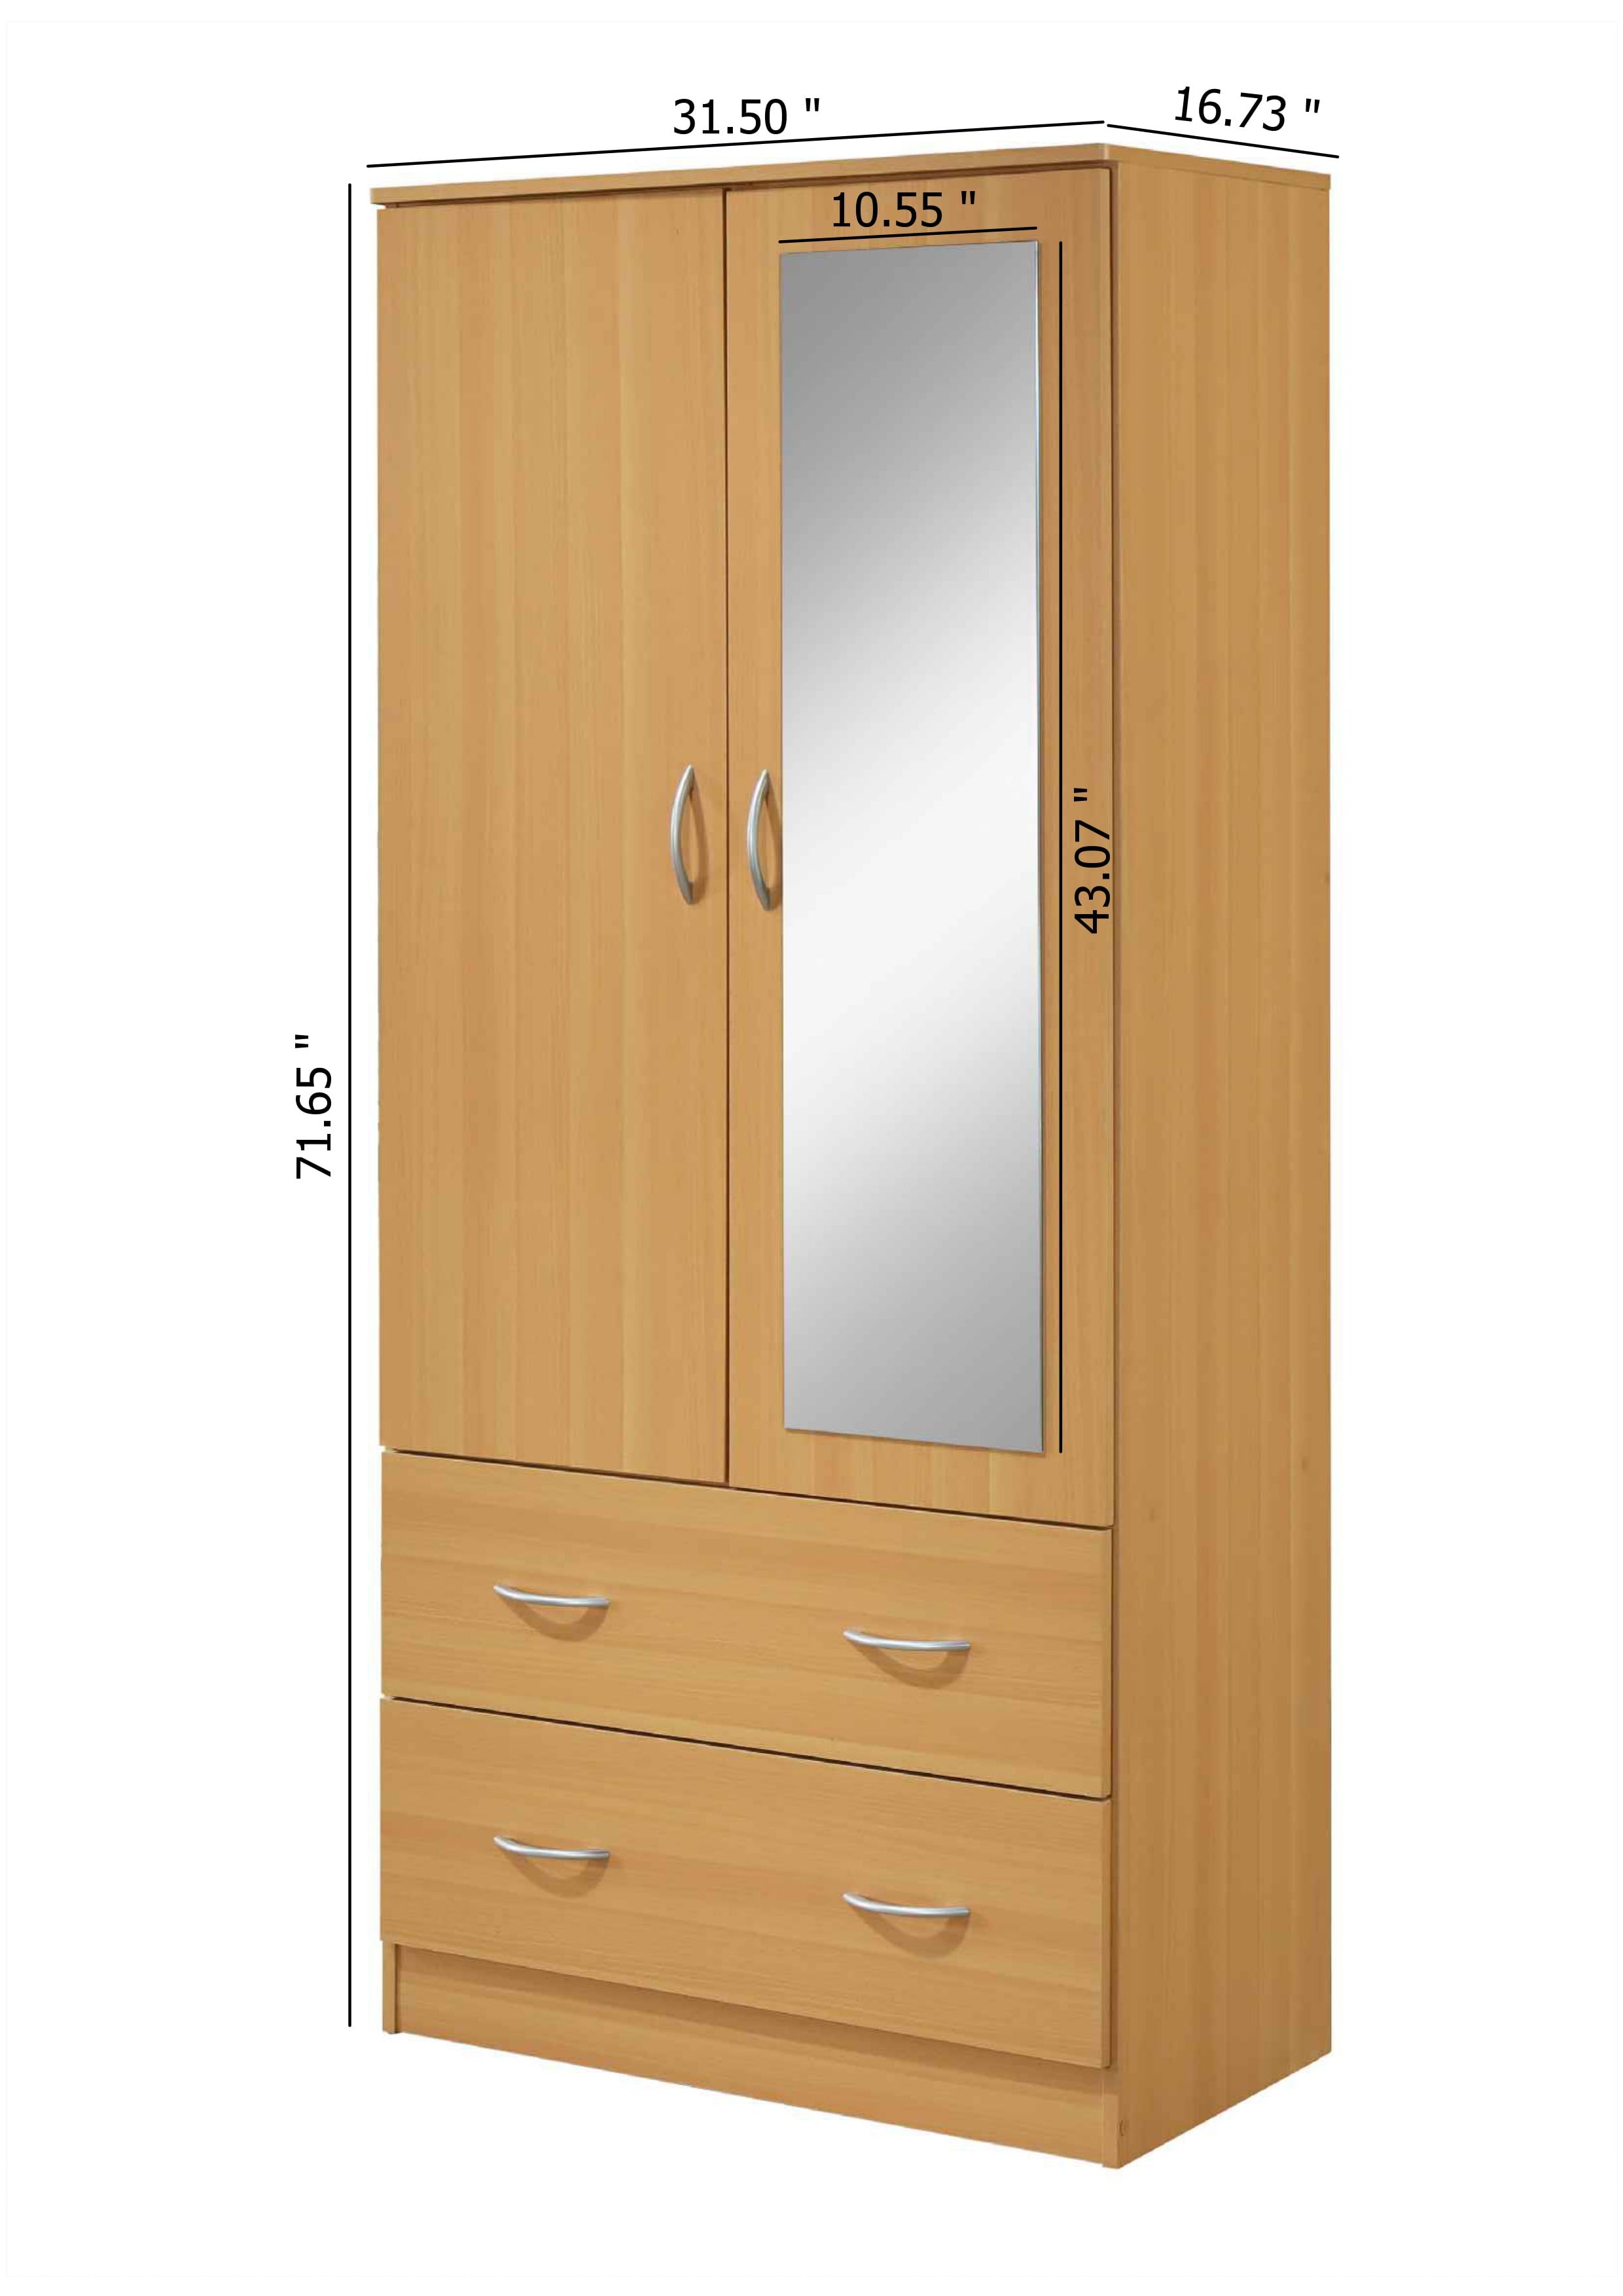 Hodedah Two Door Wardrobe With Two Drawers And Hanging Rod Plus Mirror,  Cherry – Walmart For Wardrobes In Cherry (View 15 of 15)